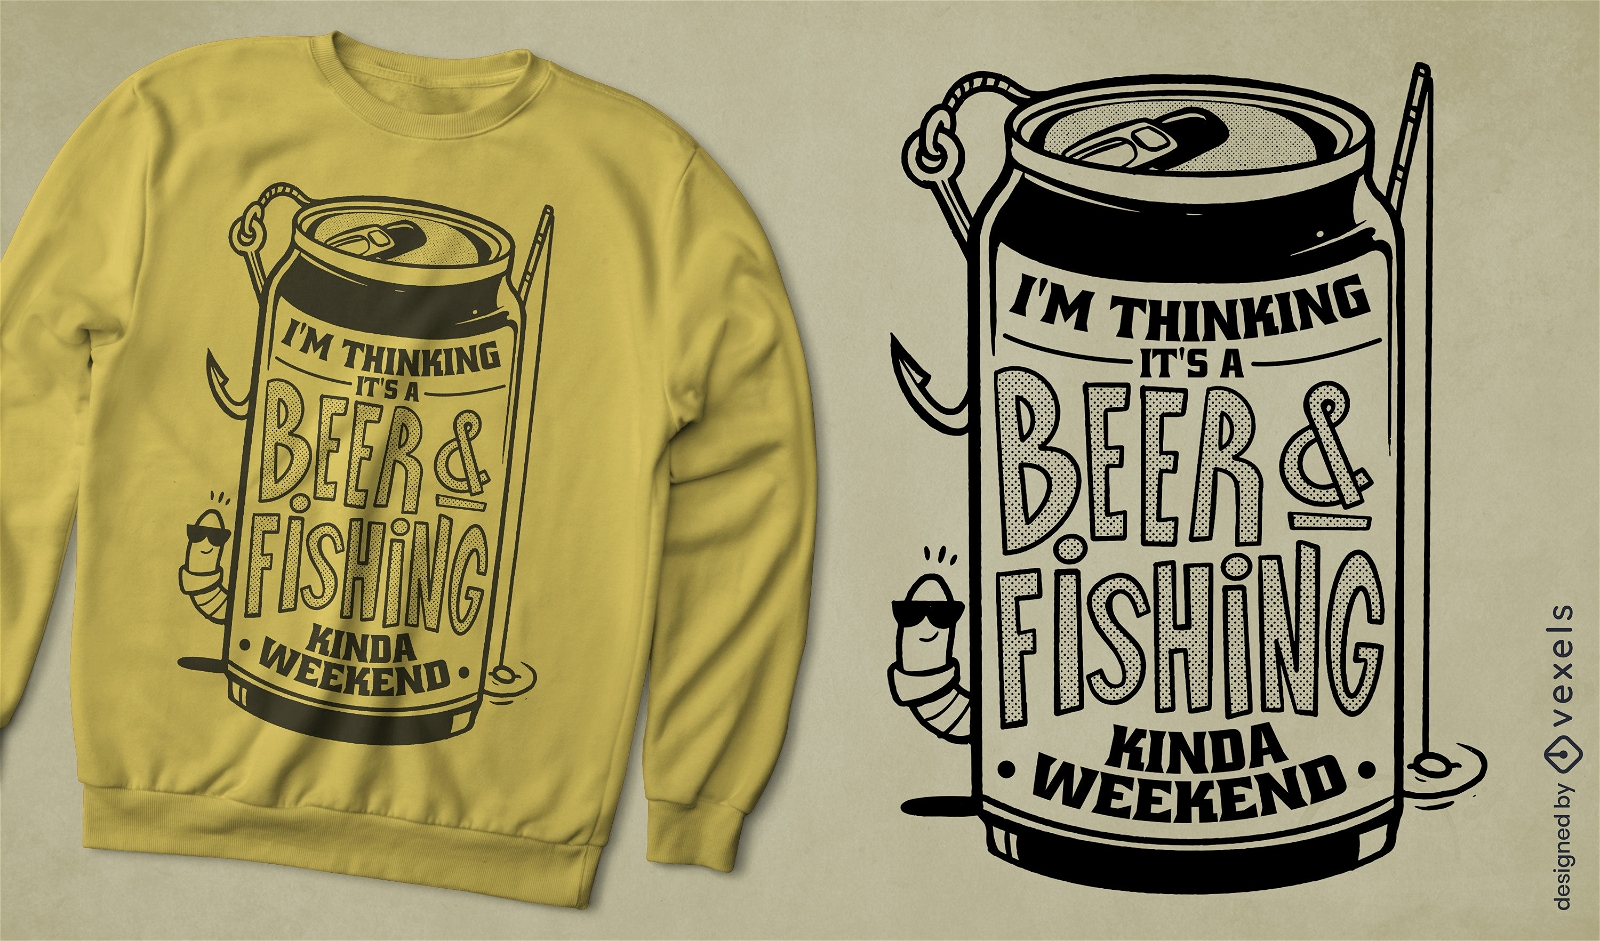 Beer and fishing t-shirt design